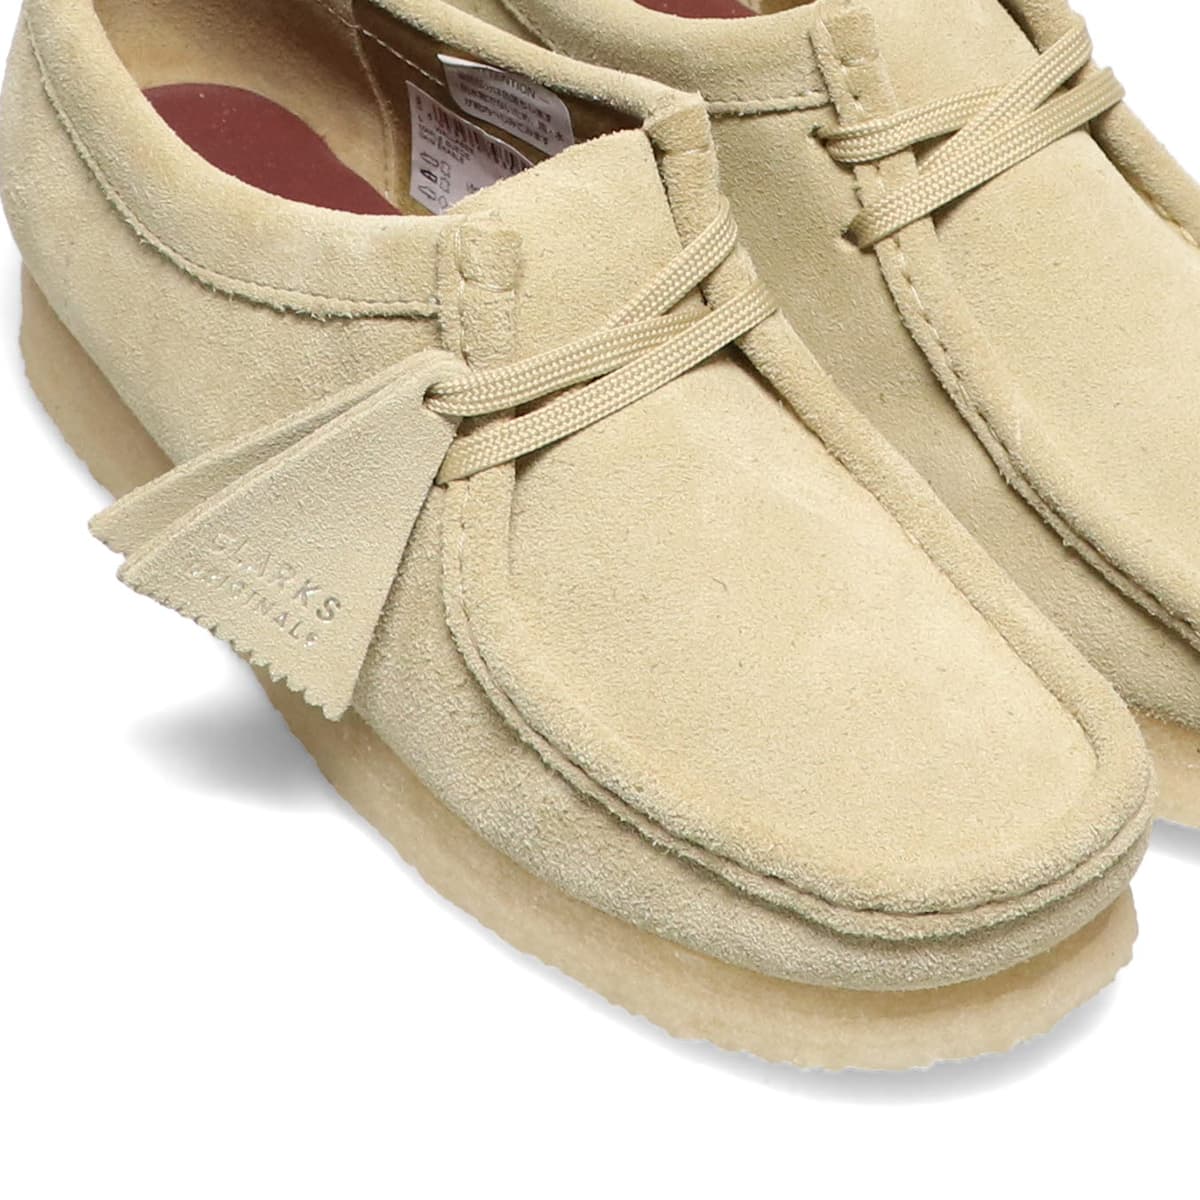 Clarks Wallabee. Maple Suede MAPLE 24SP-I クラークス ワラビー